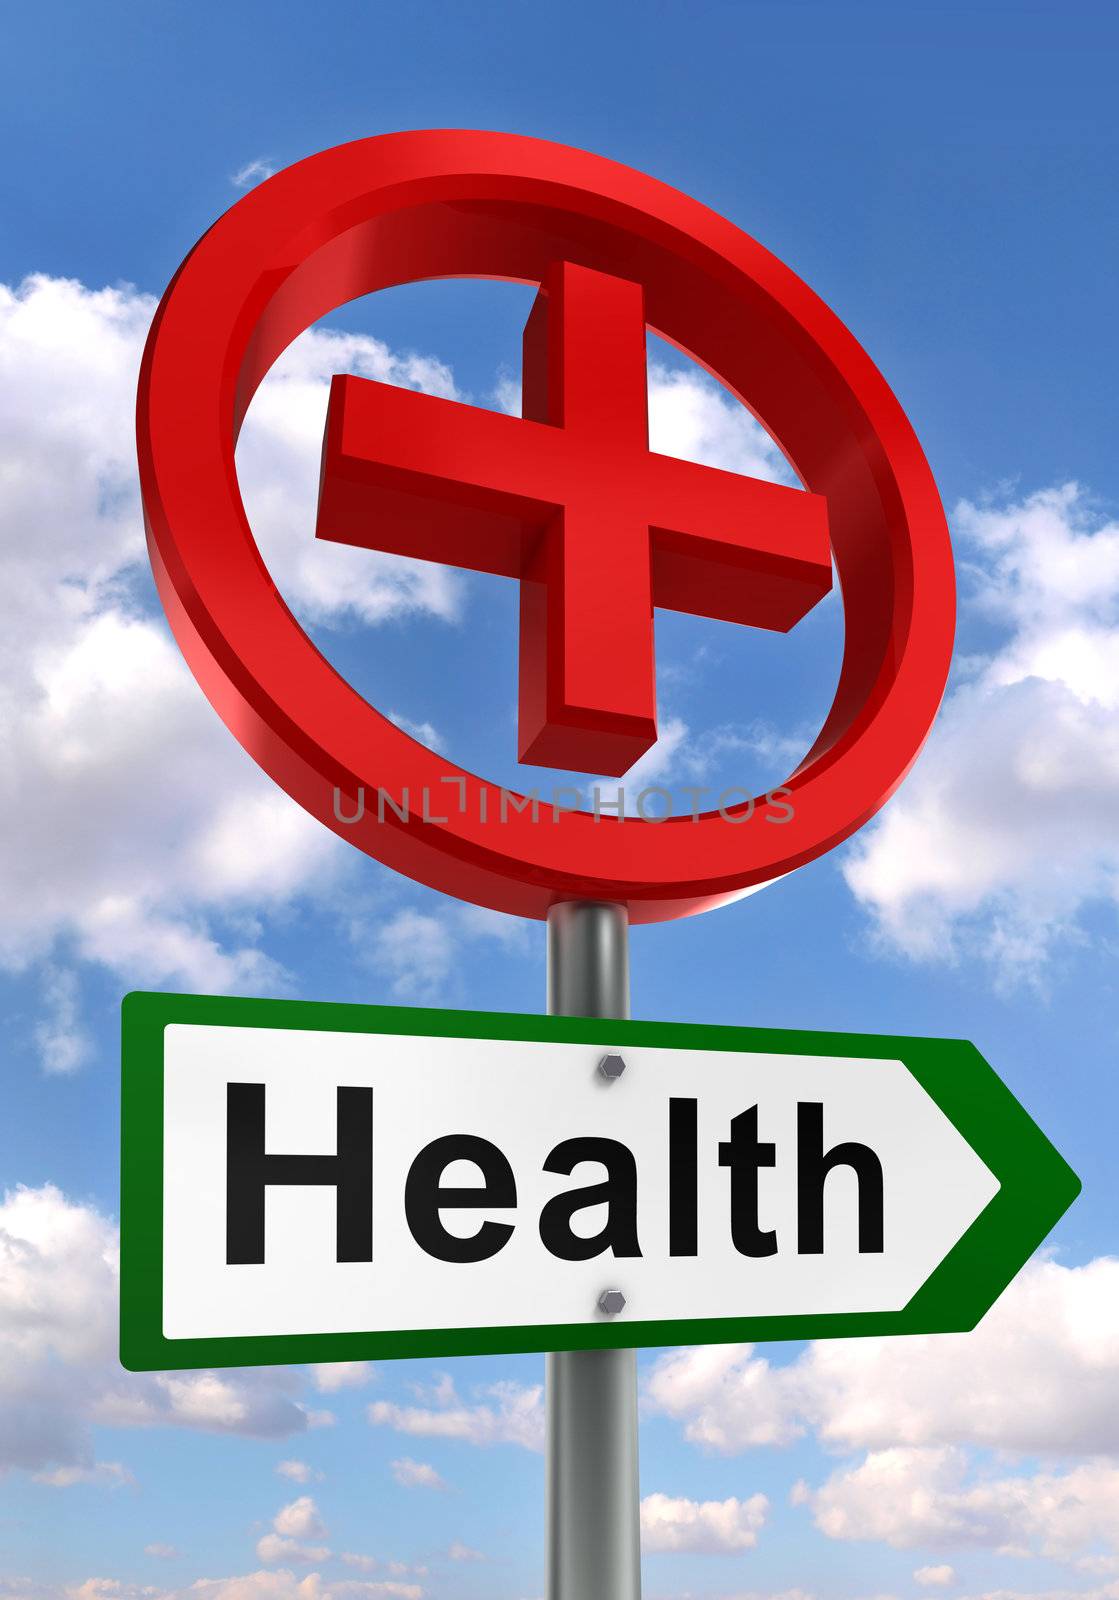 health road sign with red cross and sky backgound. clipping path included